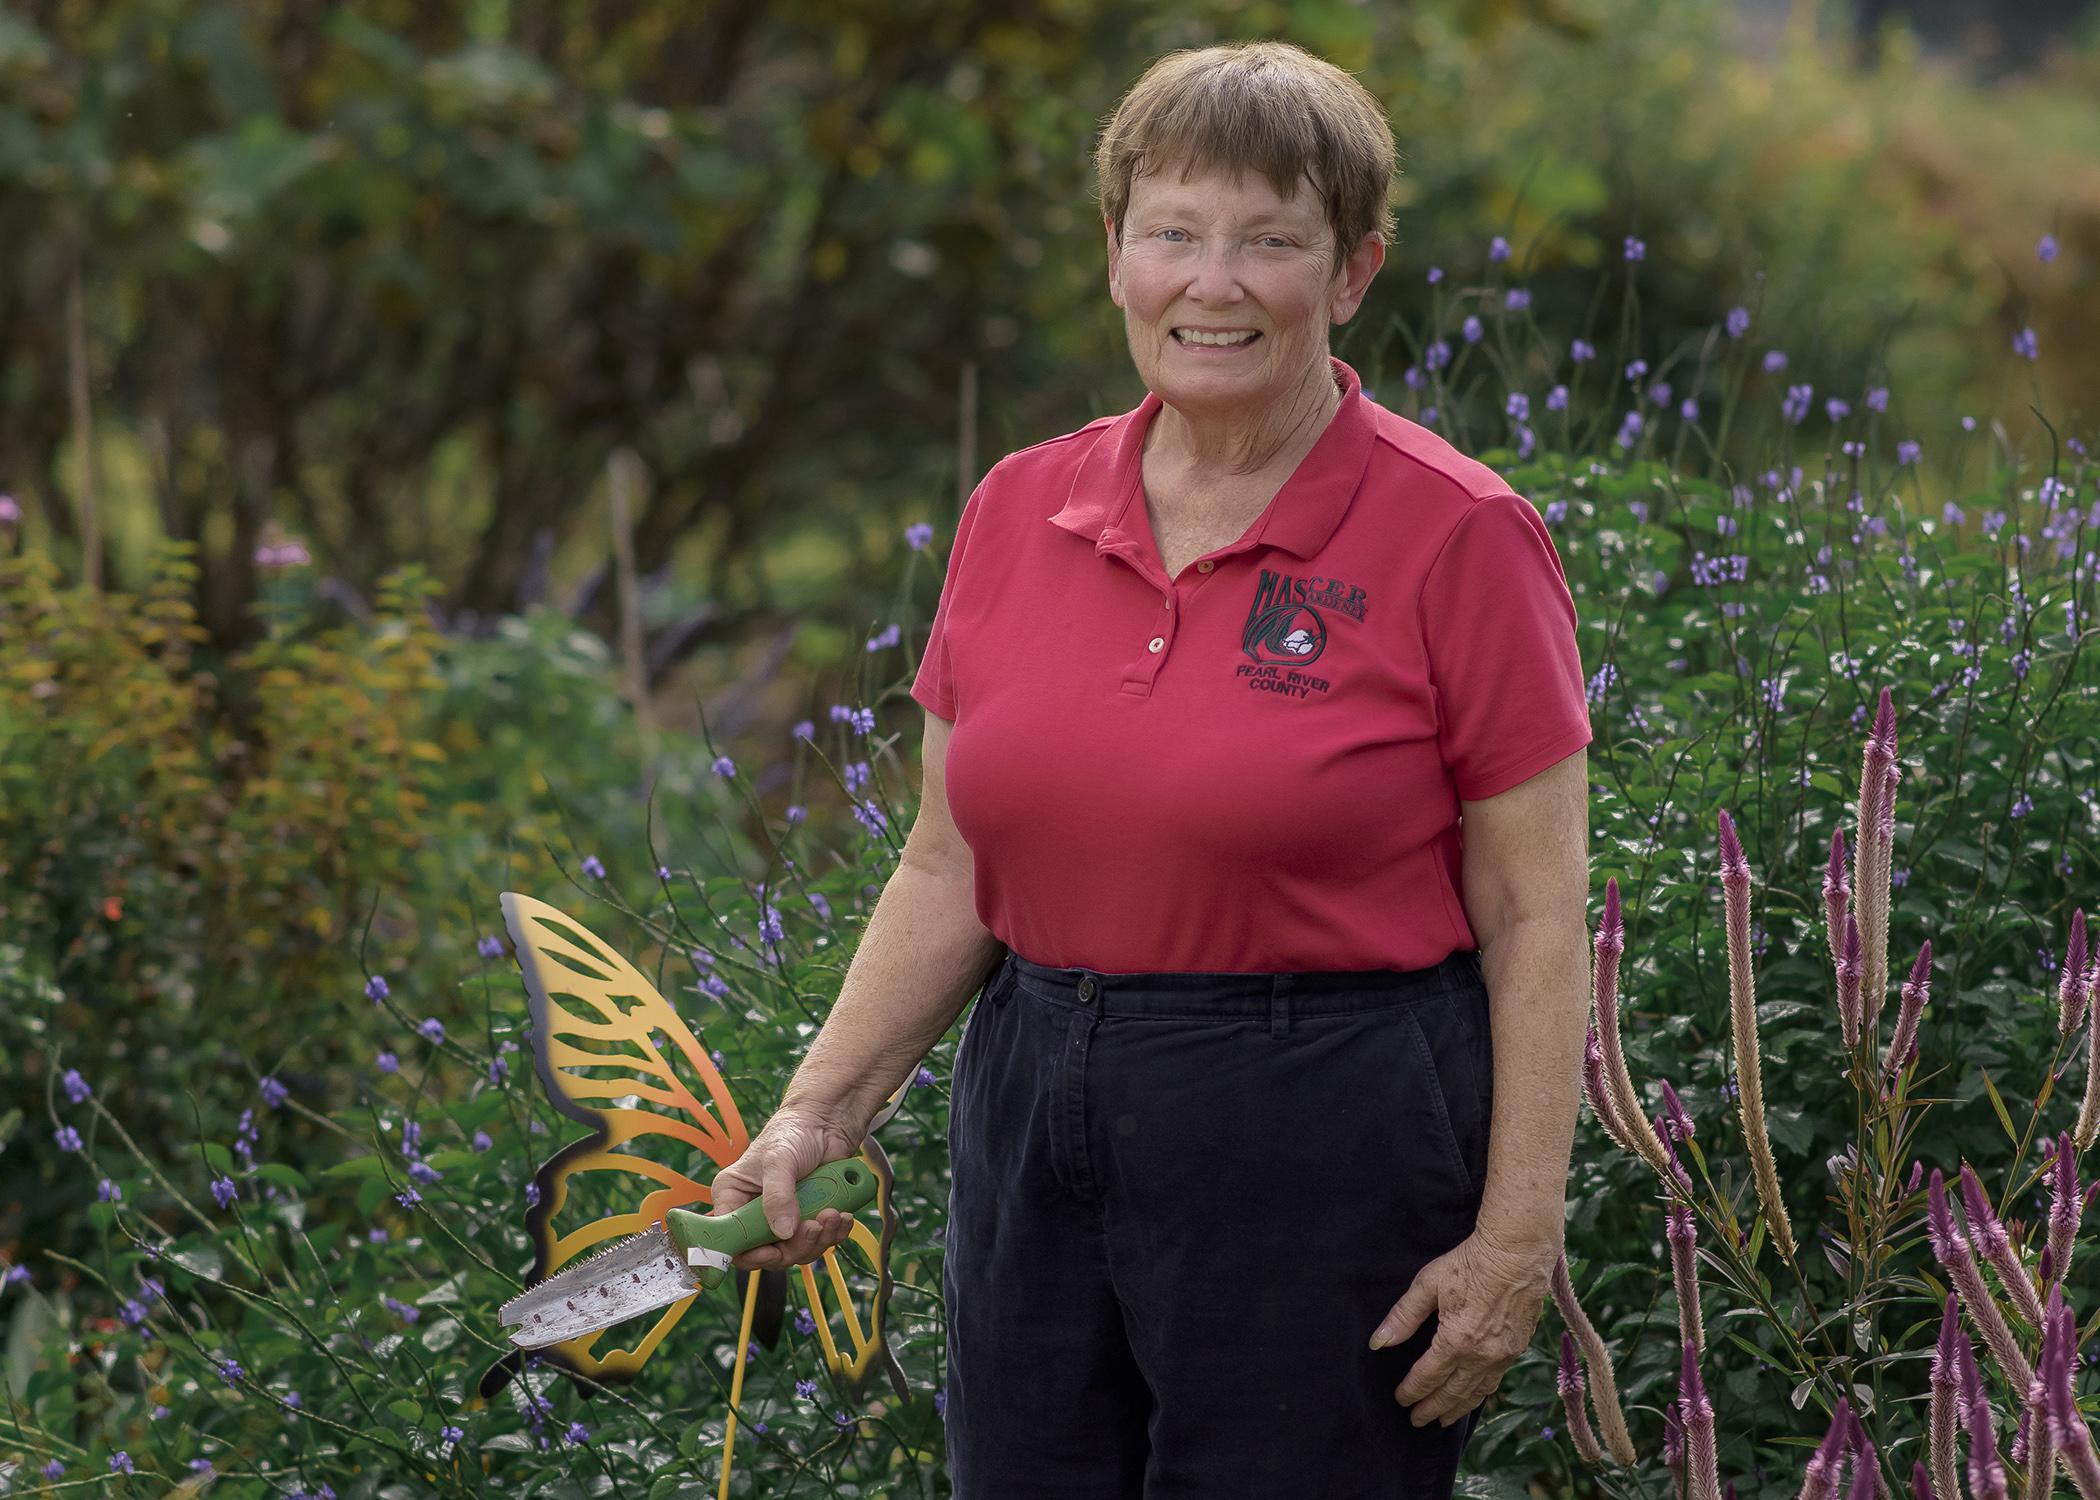 A woman holding a gardening tool stands in a green landscape.